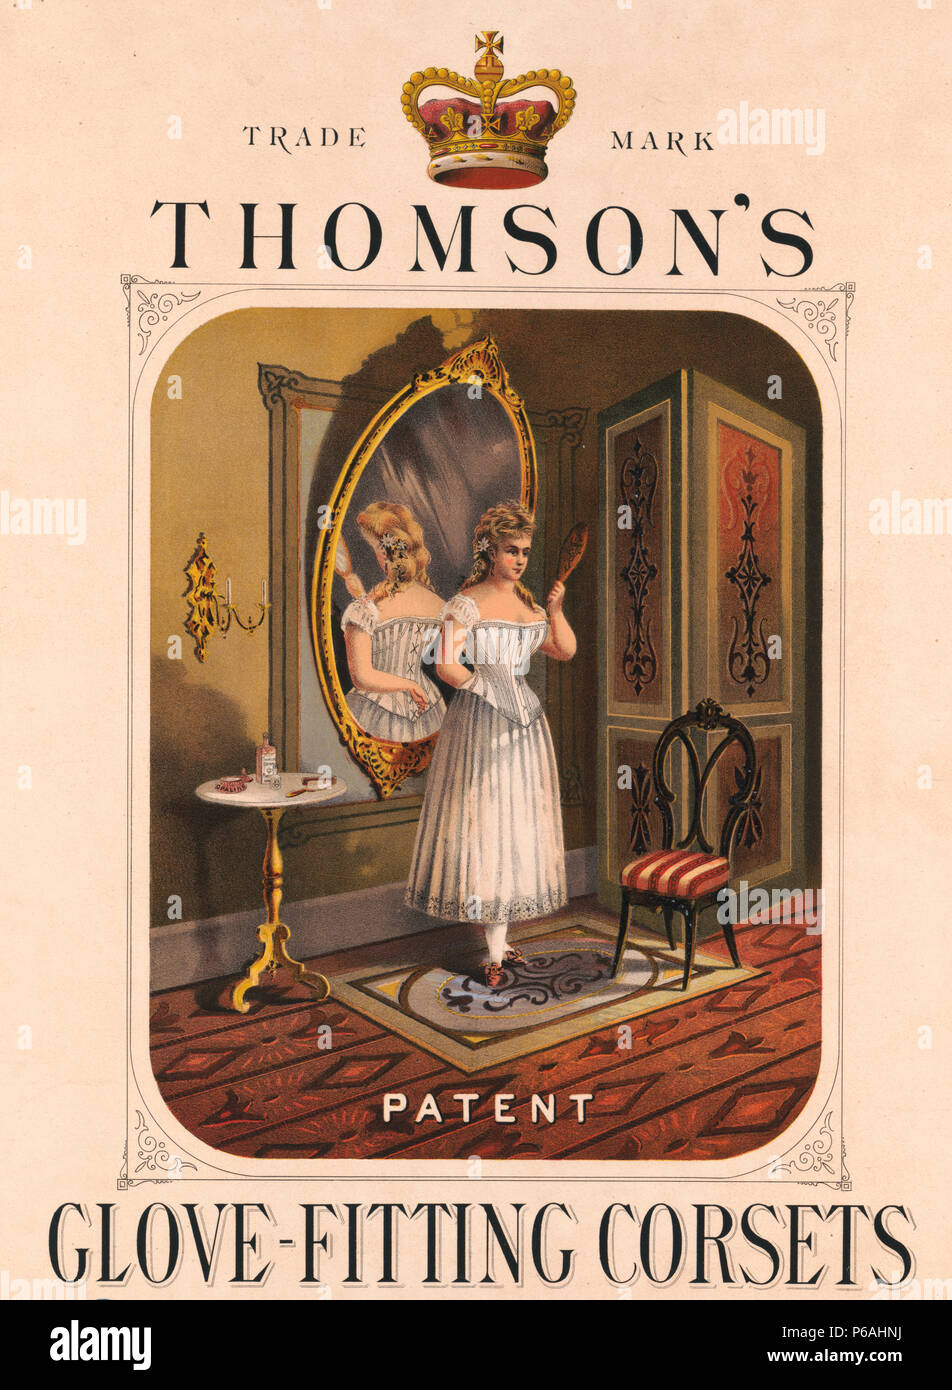 Thomson's glove-fitting corsets - 1874 Advertisement  shows the interior of a room with a young woman standing with her back to a large mirror and holding a small mirror in her left hand with which she can see herself in the larger mirror; she is wearing a Thomson's Trade Mark glove-fitting corset. A large crown appears at the top between the words 'Trade' and 'Mark'. Stock Photo